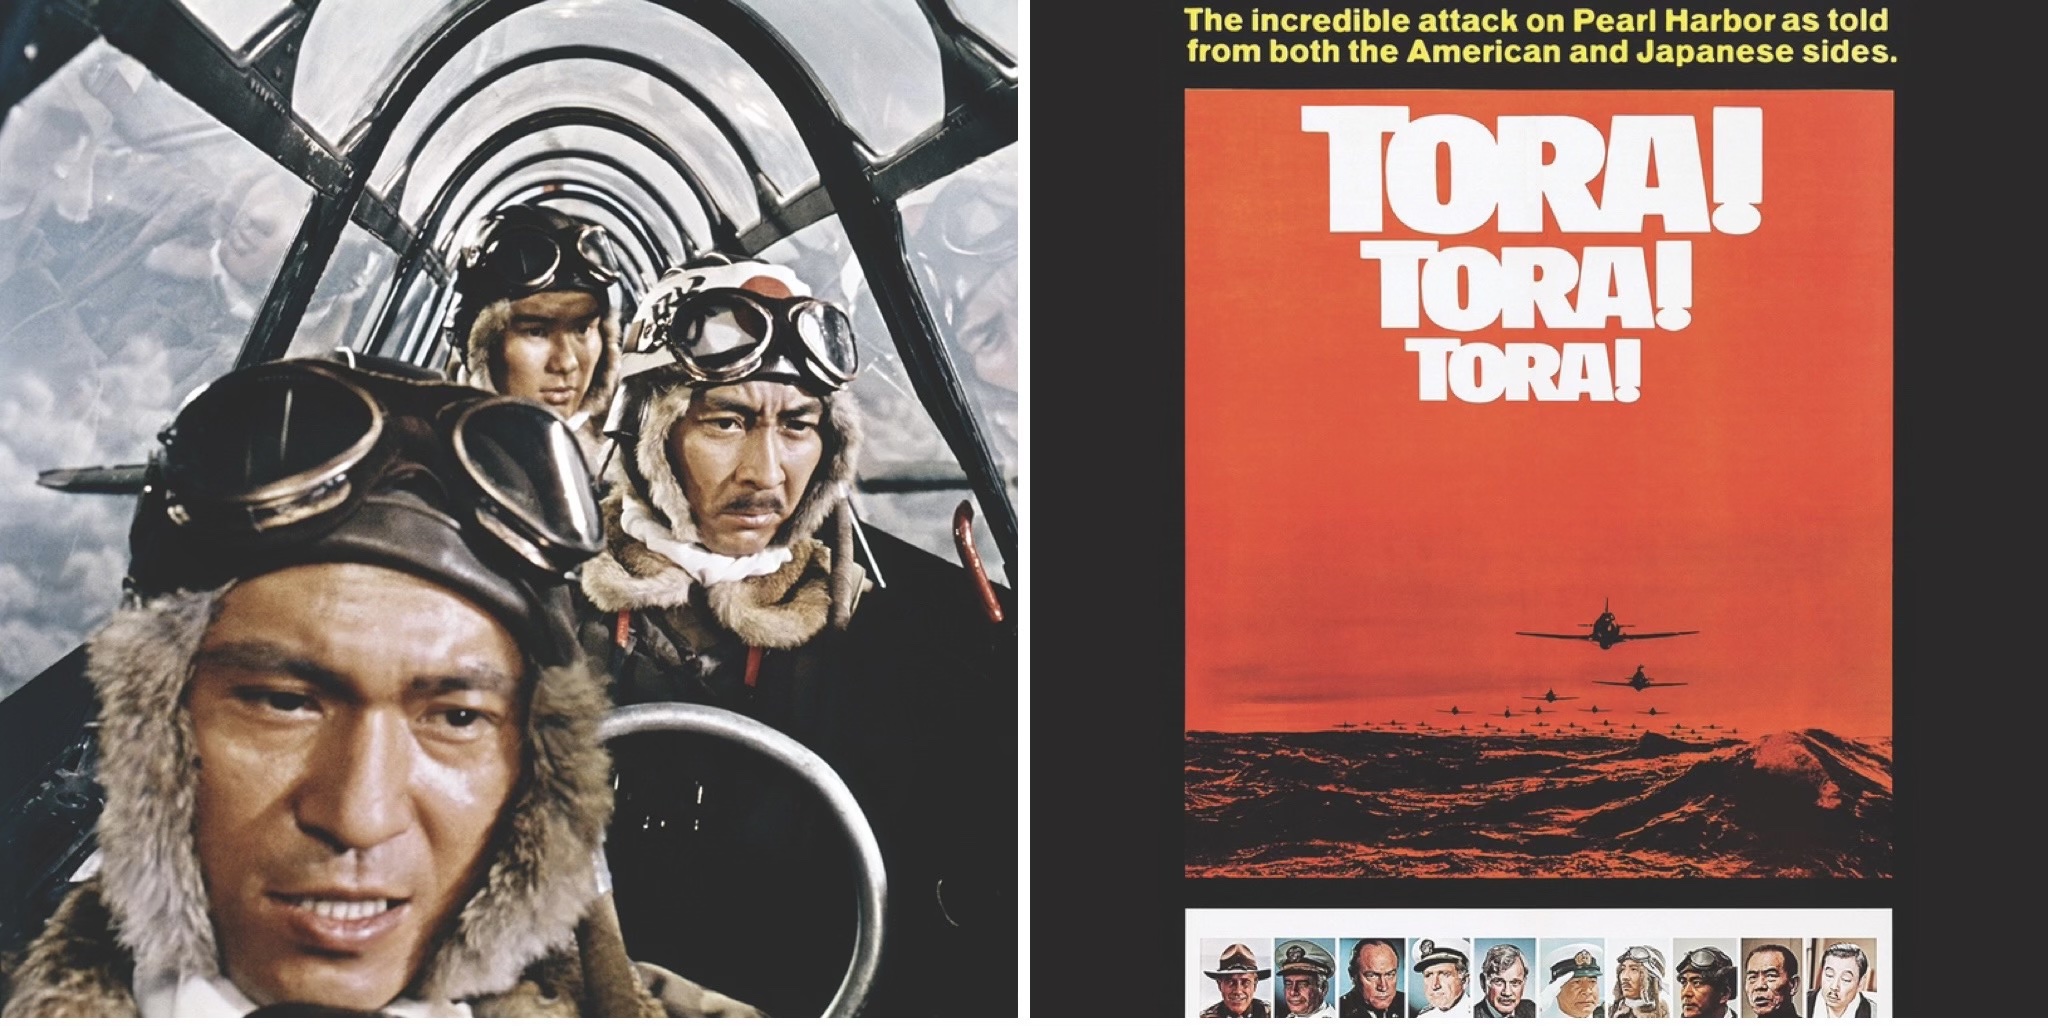 From left: A publicity still for Tora! Tora! Tora! showing three Japanese airmen on their way to Pearl Harbor; the poster for the filmâ€™s release in 1970, with 10 actorsâ€”five American and five Japaneseâ€”pictured along the bottom. (Getty Images)